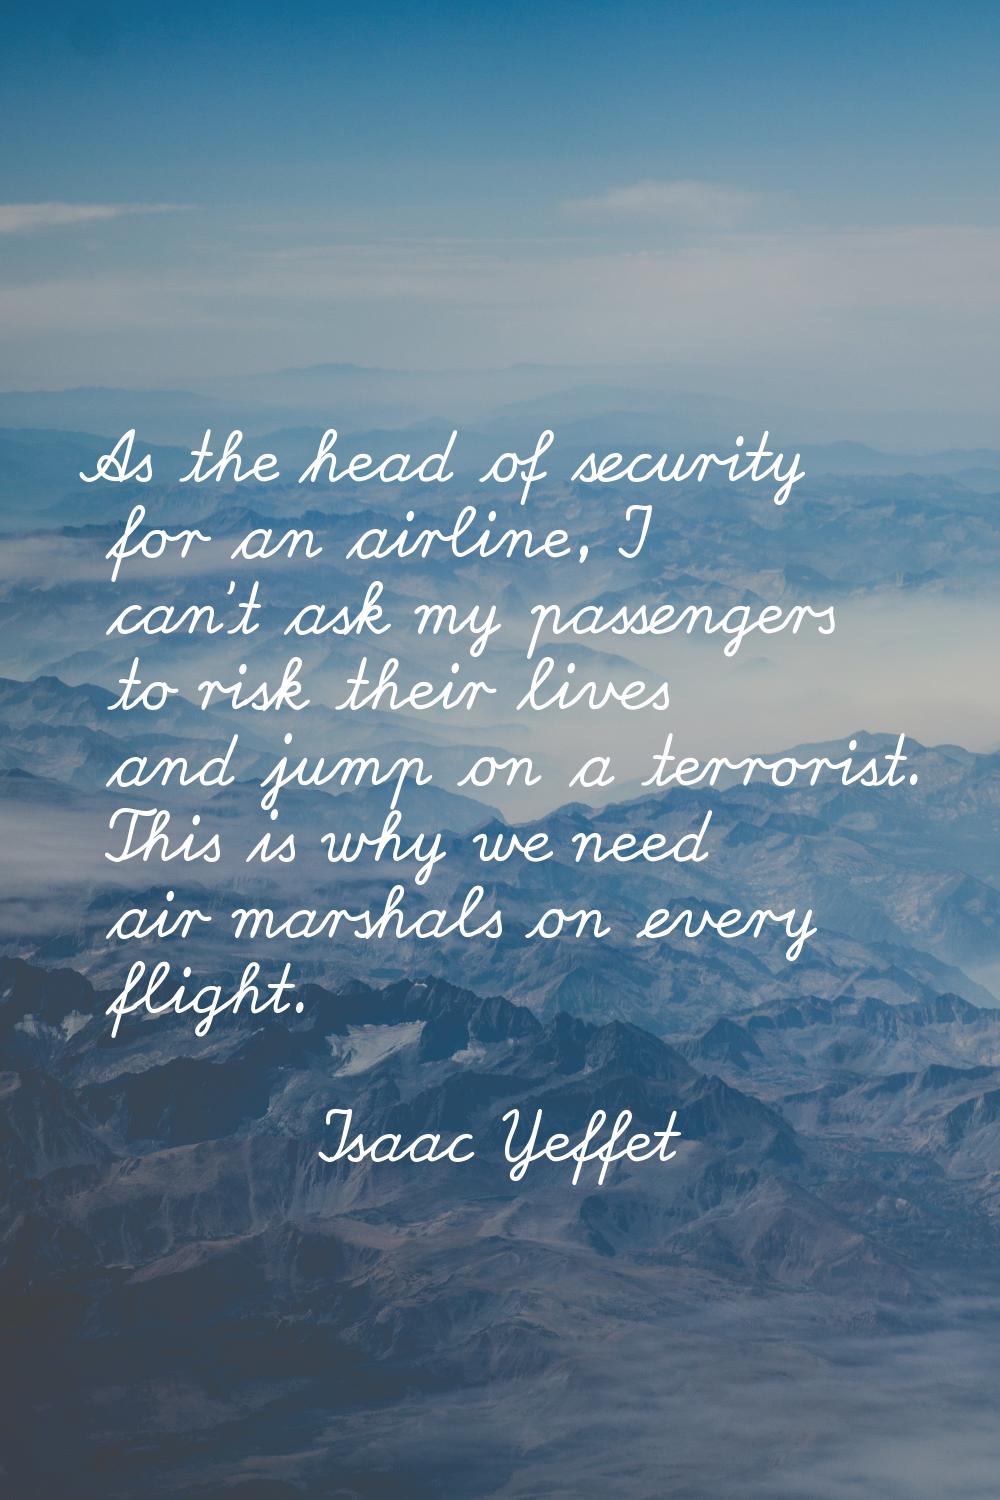 As the head of security for an airline, I can't ask my passengers to risk their lives and jump on a